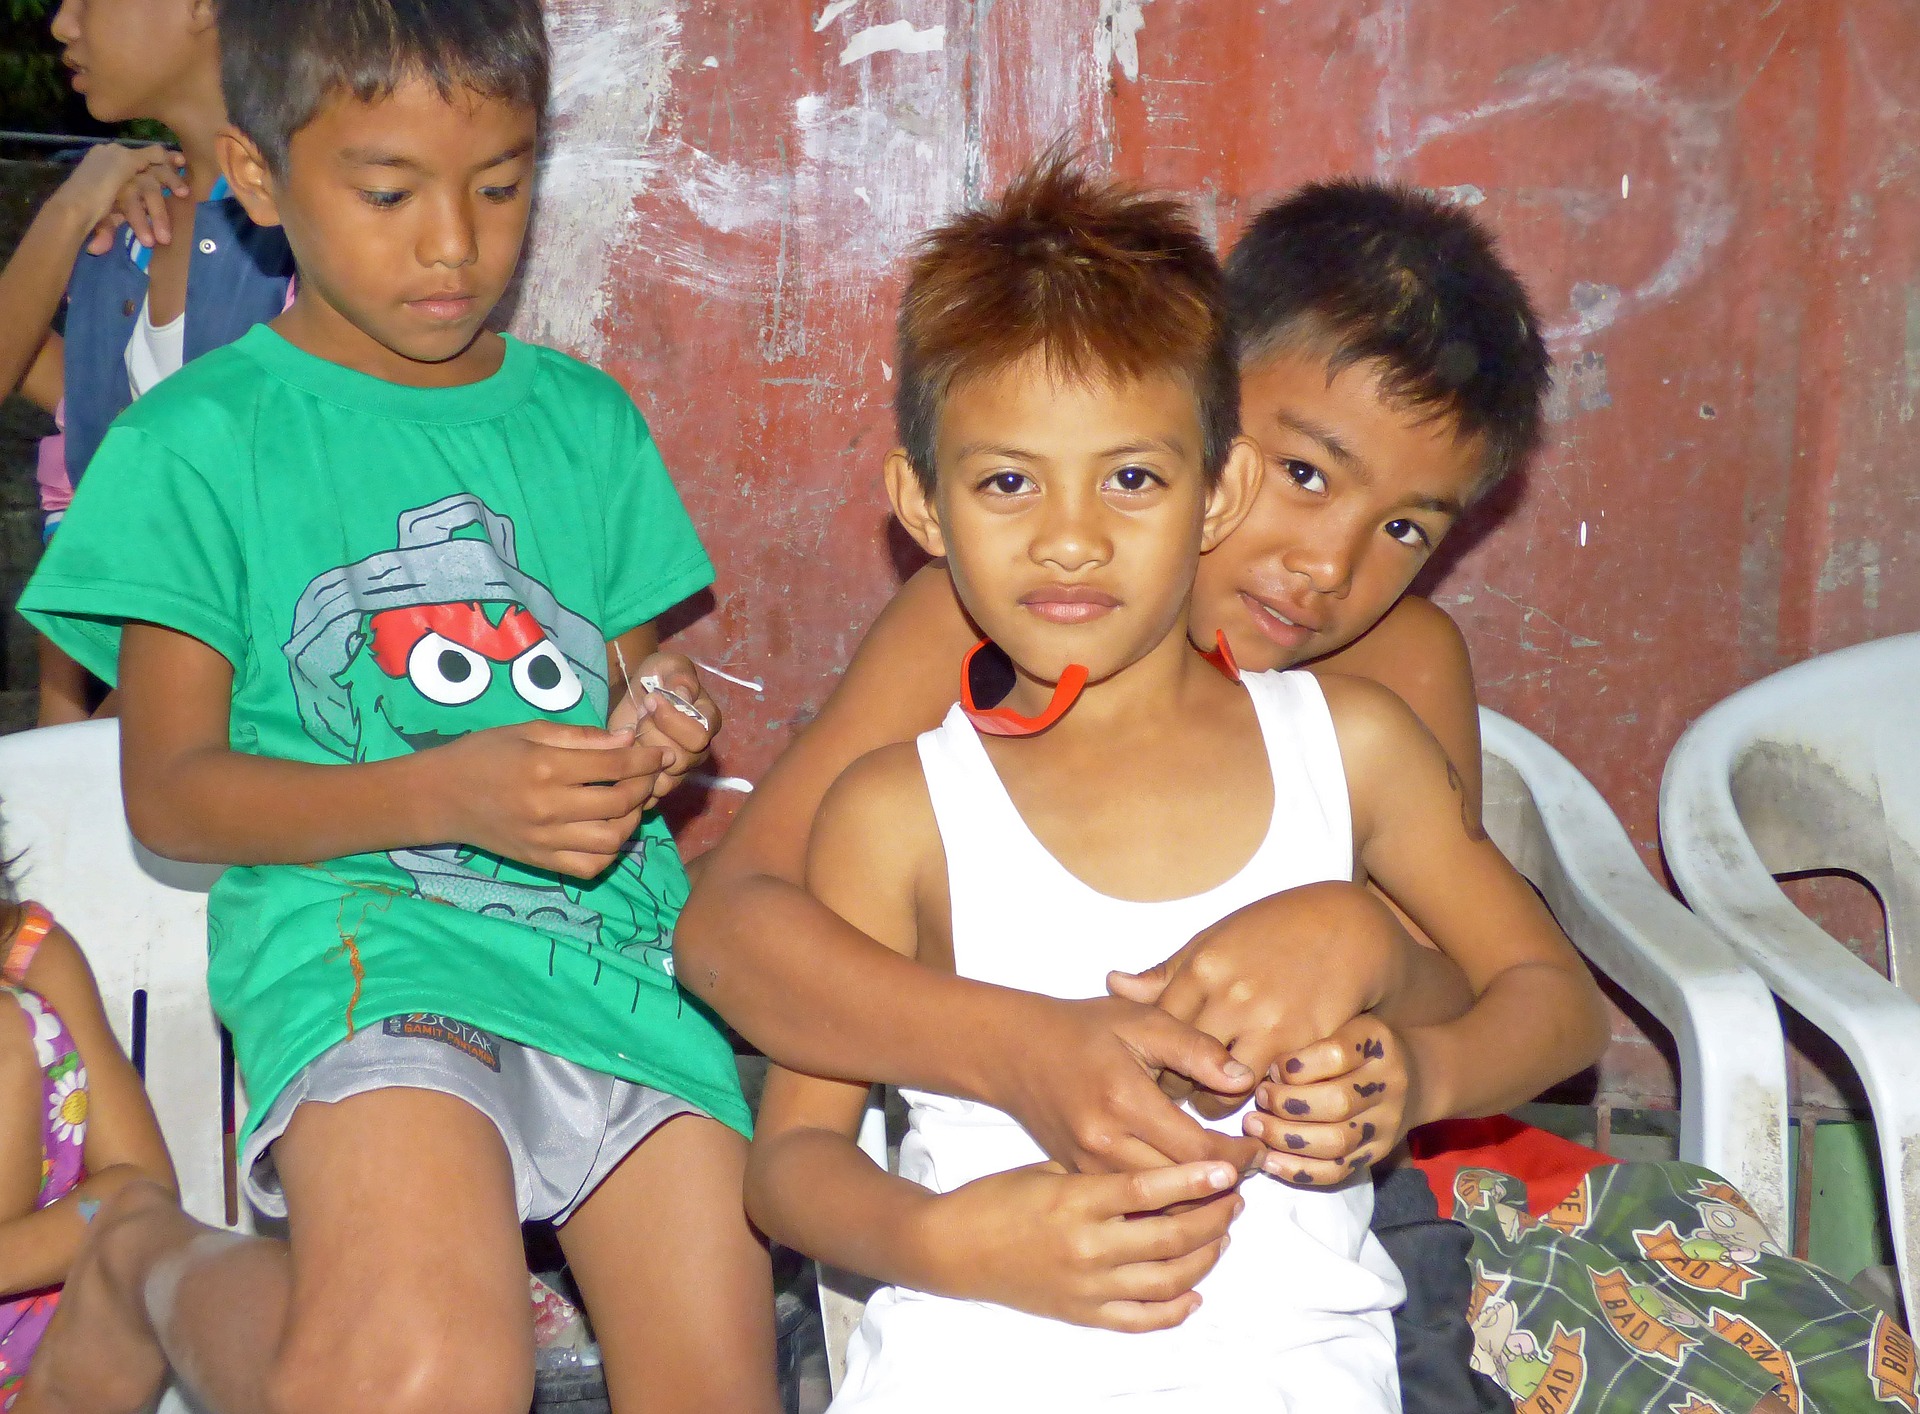 Kids & differences from America to the Philippines